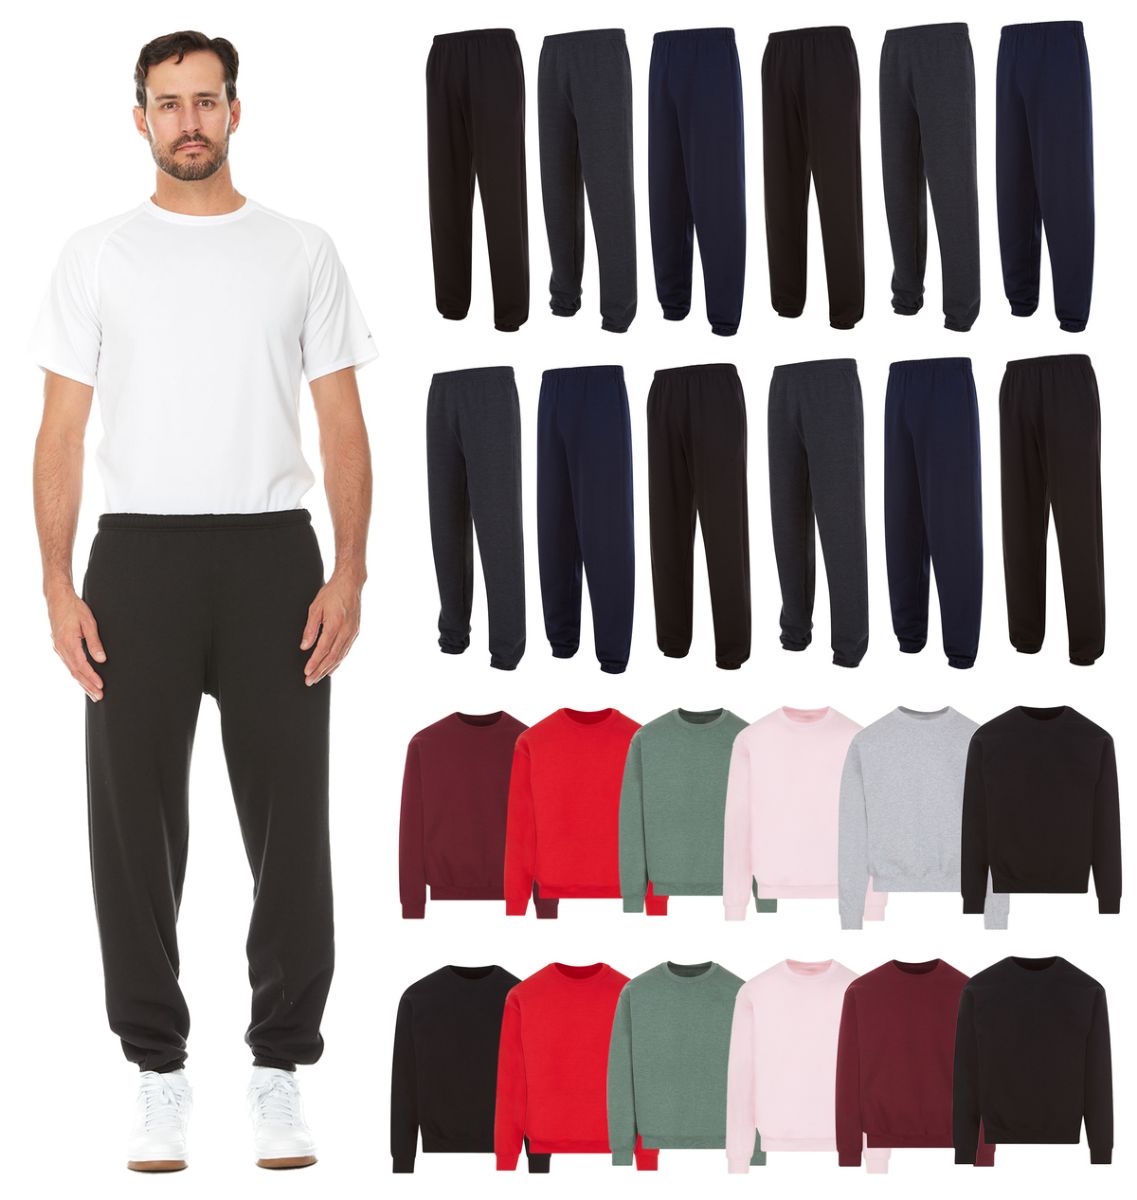 24 Pieces of Mix And Match Mens Fleece Jogger Pants And Crew Neck Sweatshirts Assorted Colors Size 2xlarge